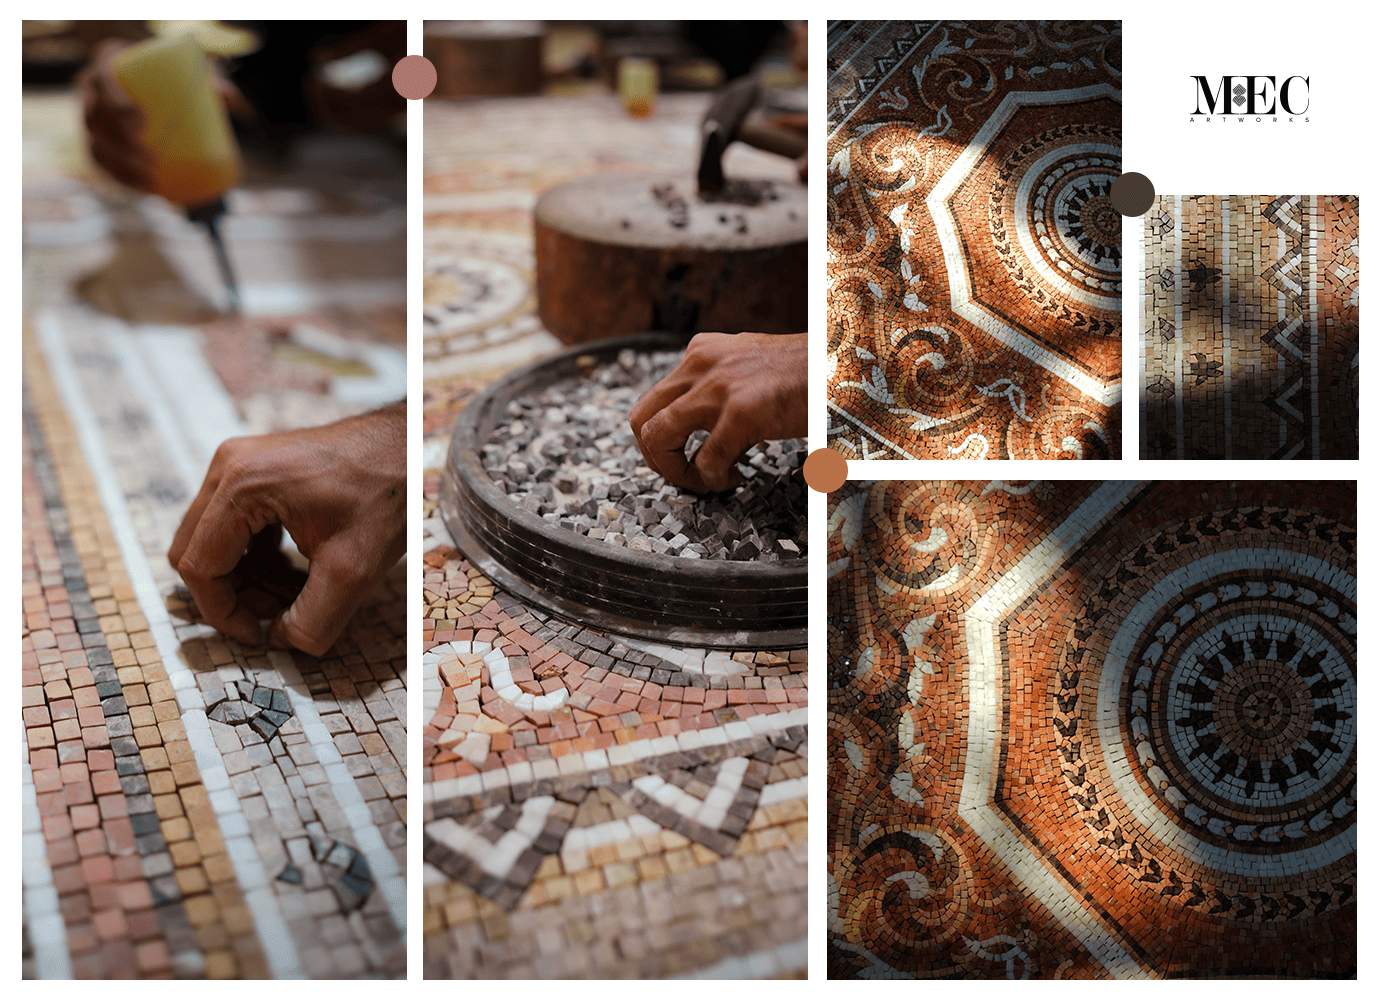 a marble mosaic rug being fabricated. the rug features intricate mosaic design that is being handcut to achieve the design details.